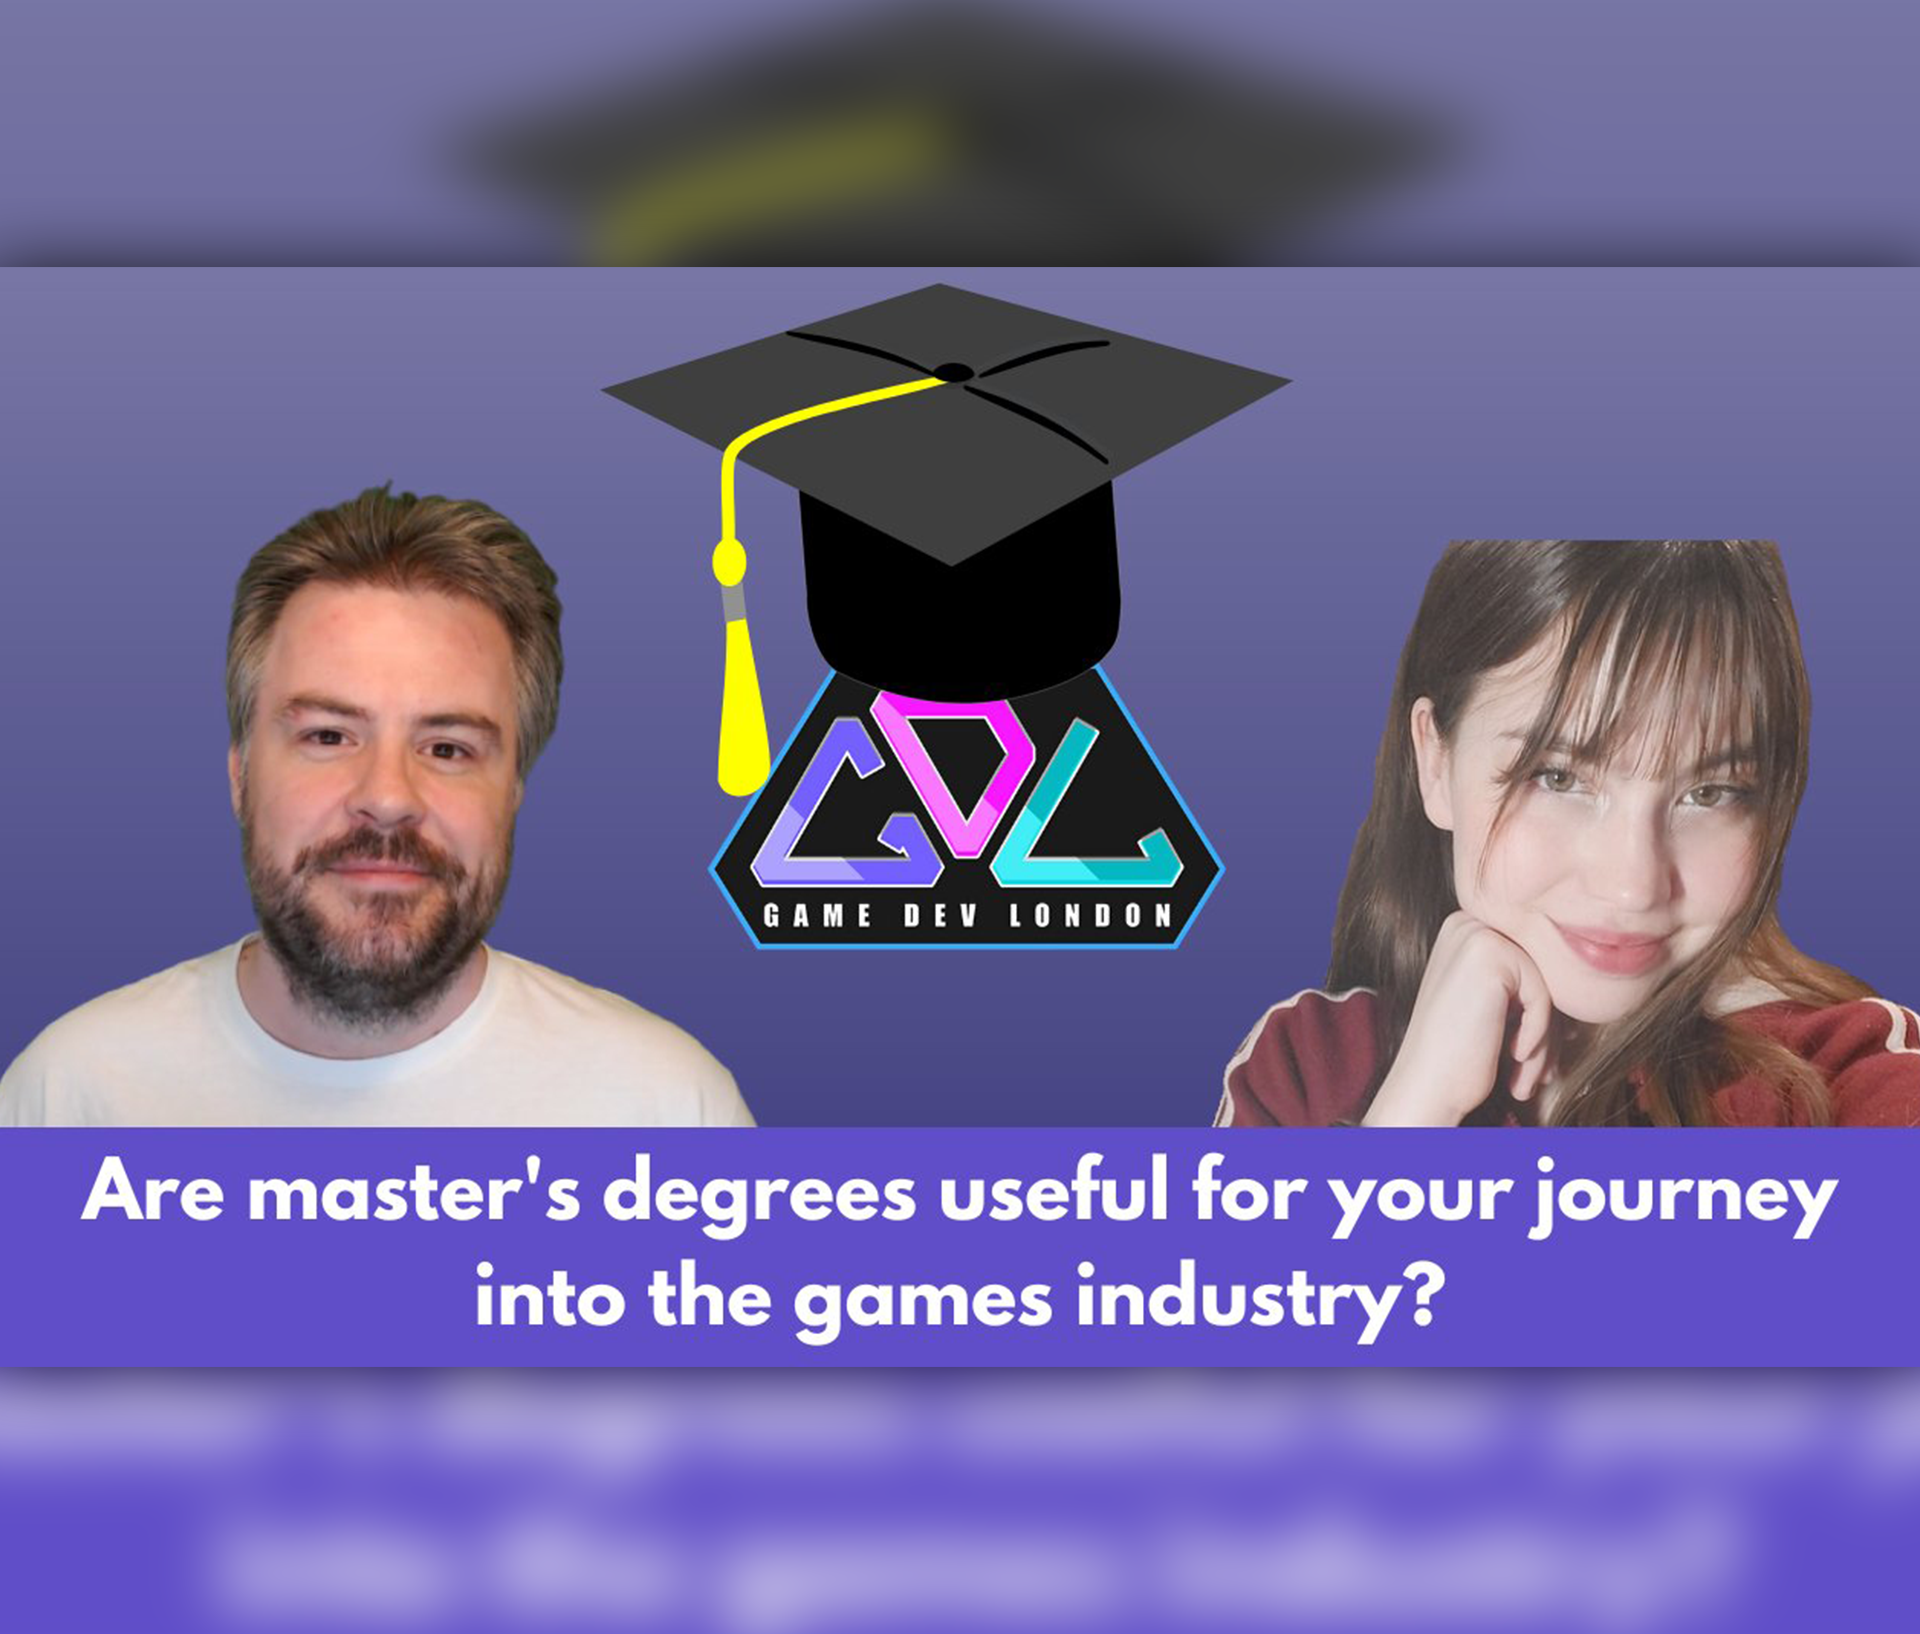 Are Master's Degrees Useful For Your Journey Into Games?